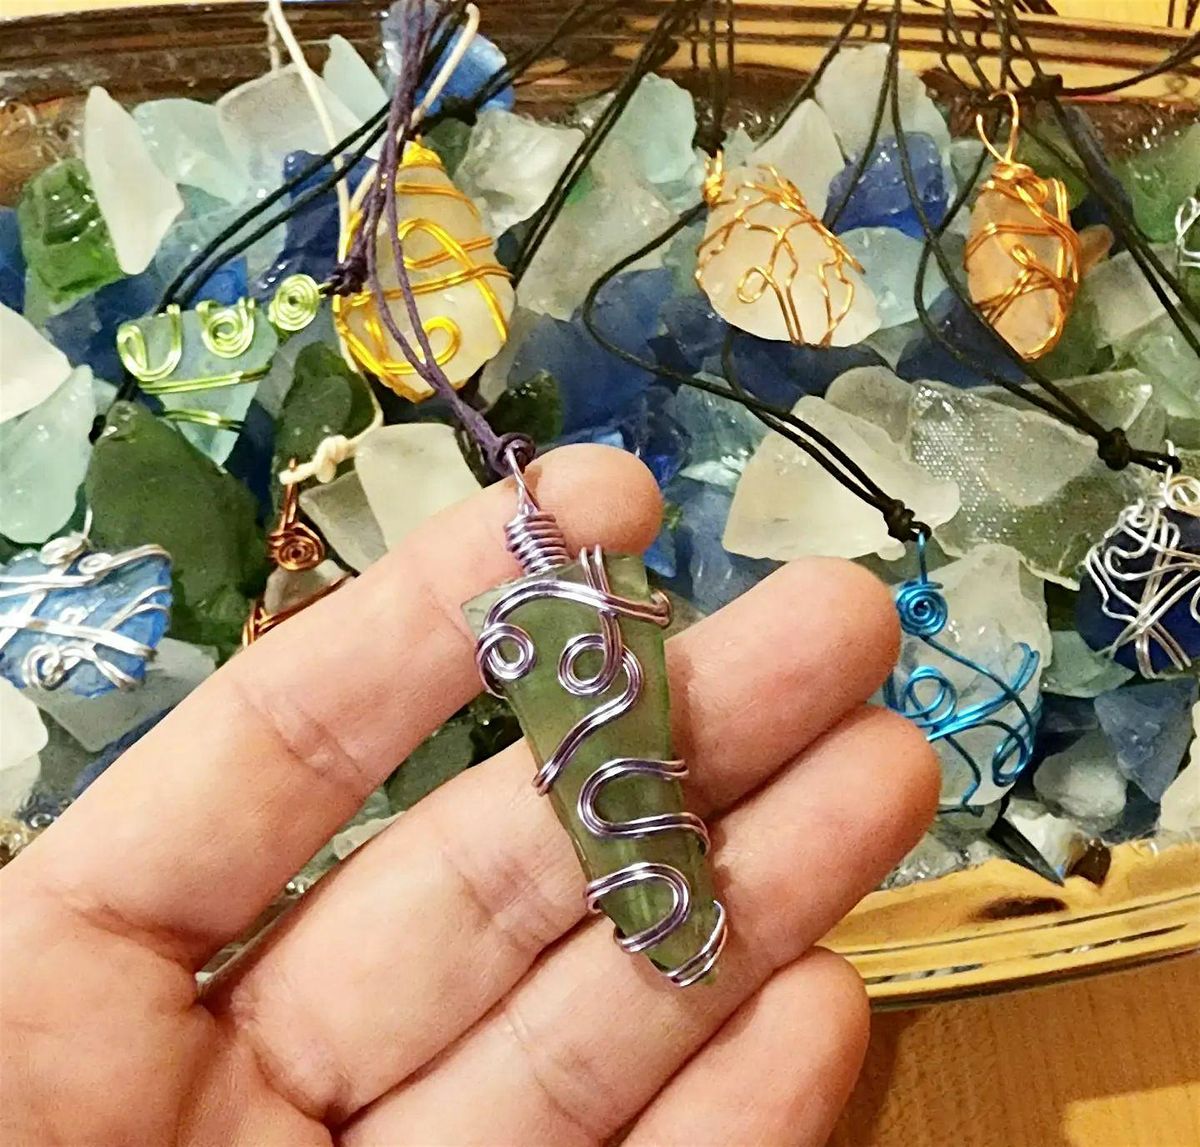 Wire Wrap Sea Glass at 314 Beer Garden!